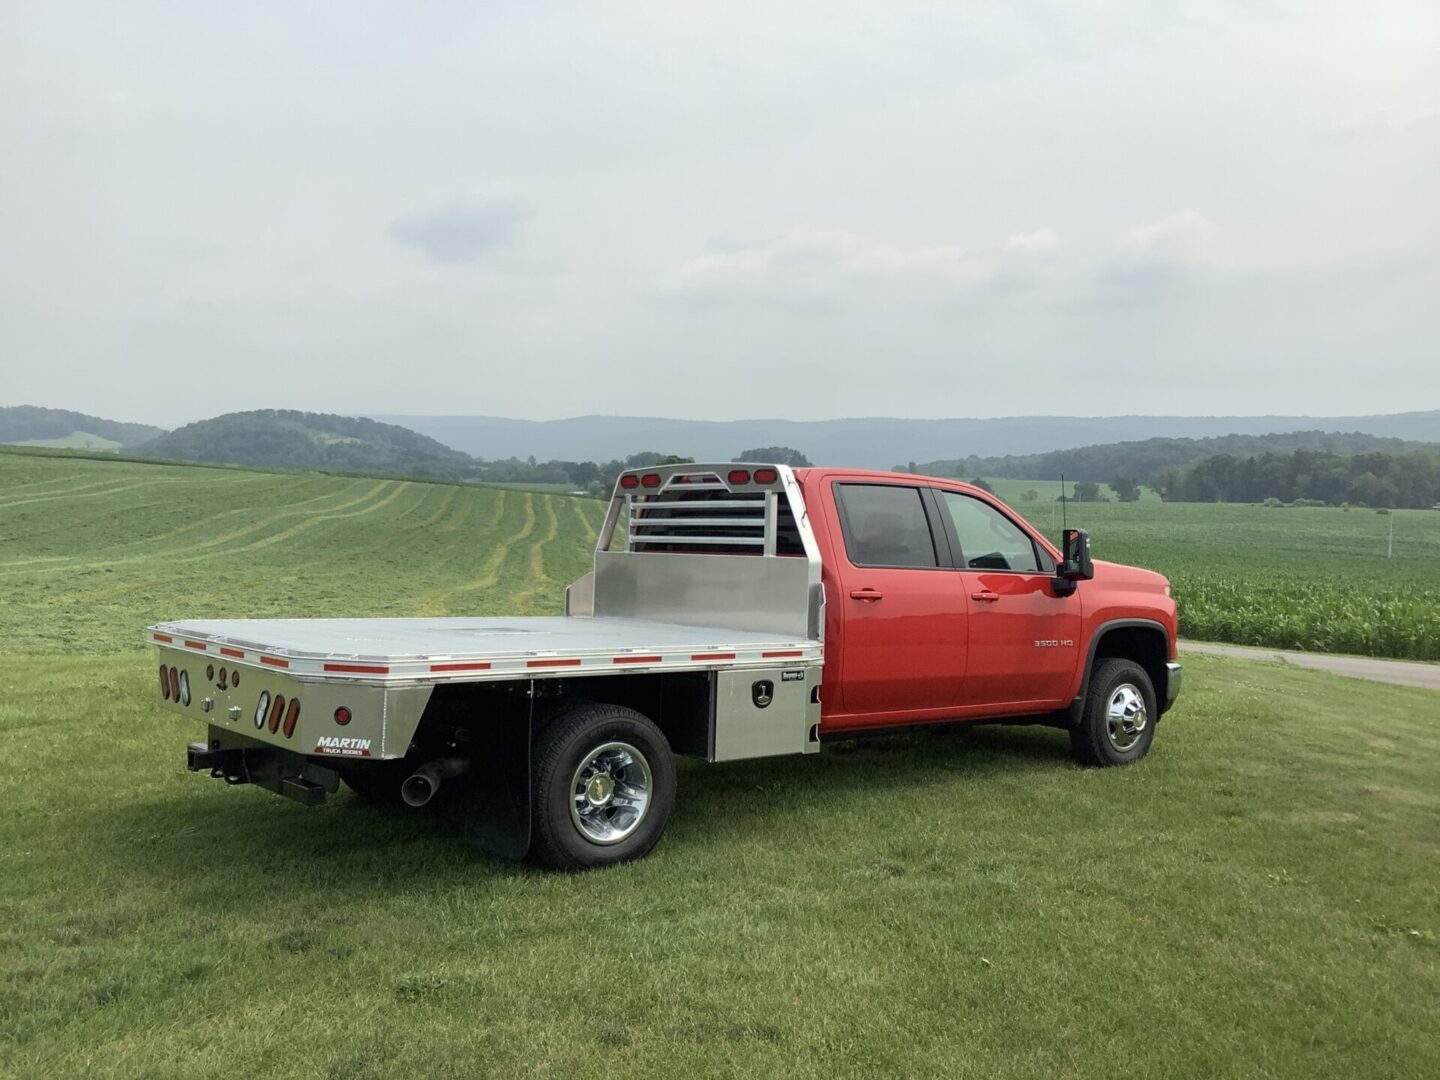 A red flatbed pickup truck parked on grass overlooking a cultivated field.